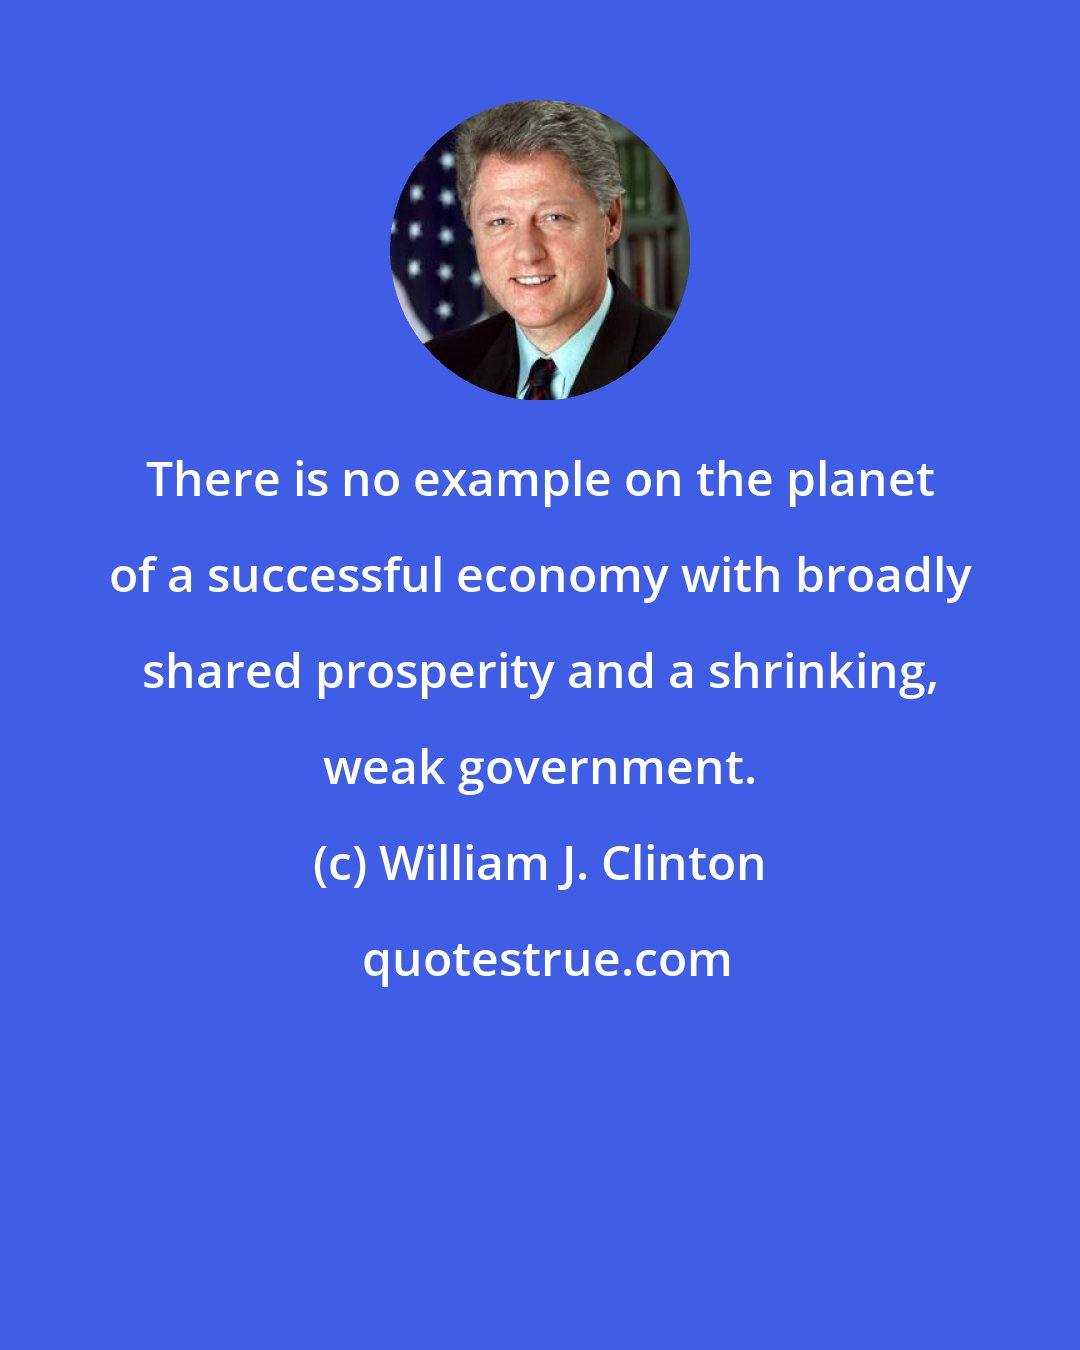 William J. Clinton: There is no example on the planet of a successful economy with broadly shared prosperity and a shrinking, weak government.